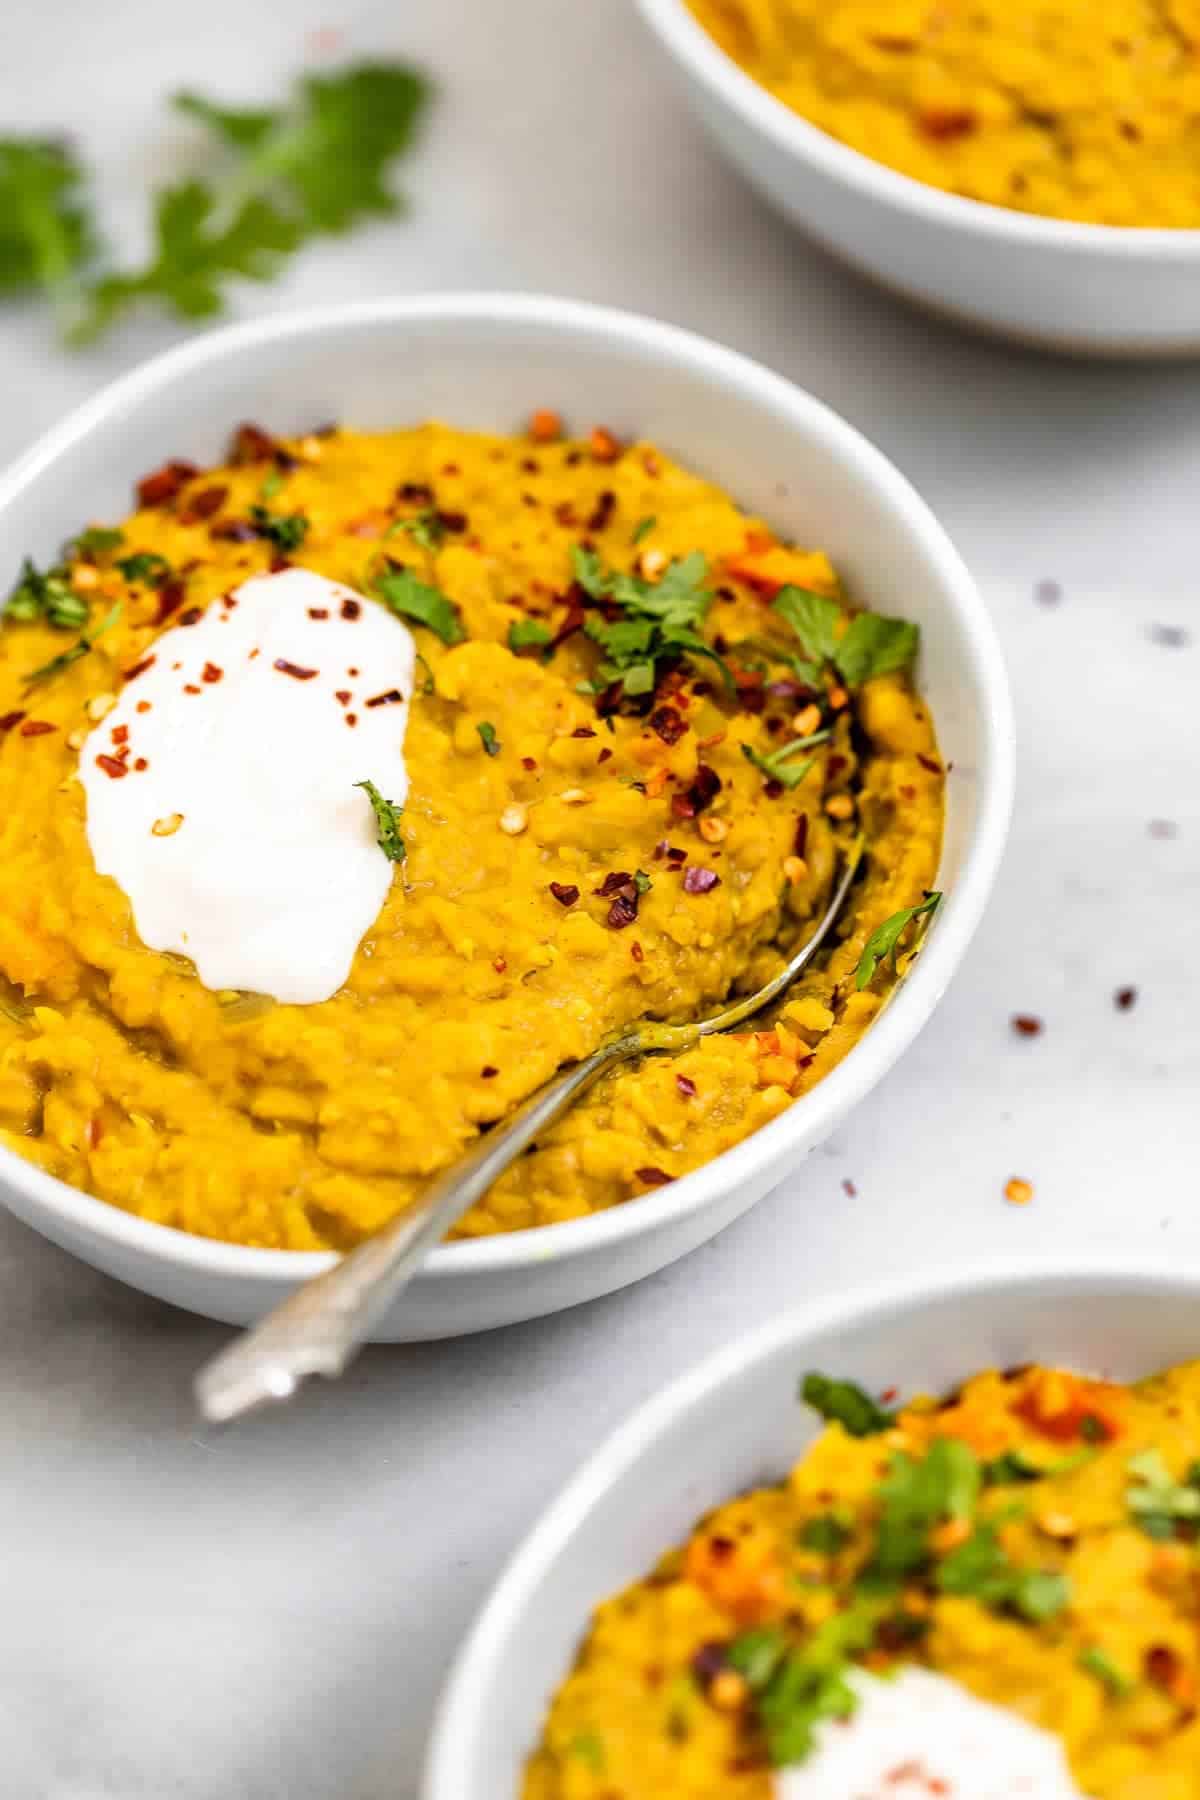 30 Minute Red Lentil Dahl | Eat With Clarity Recipes